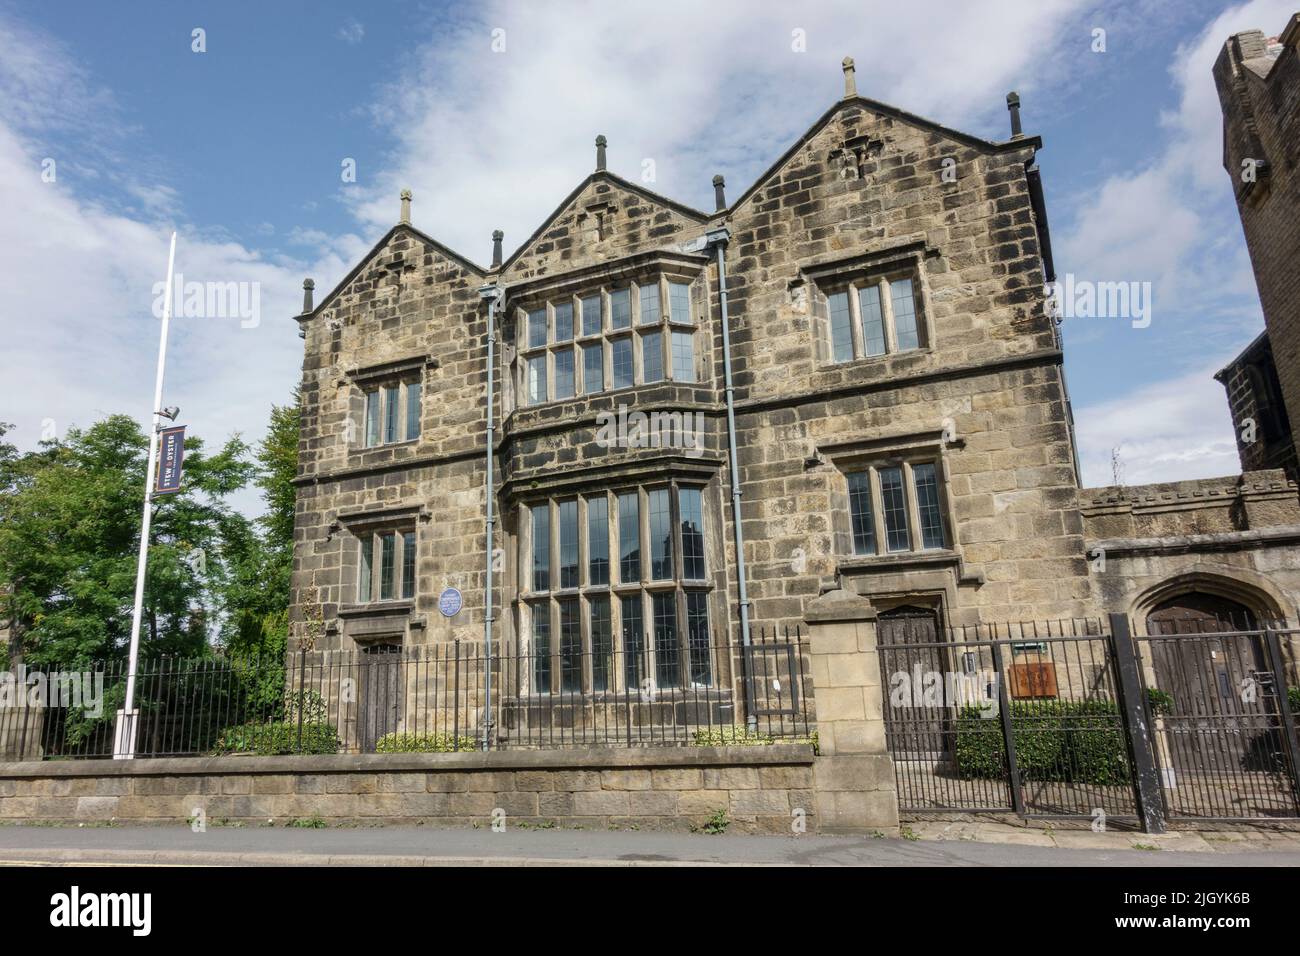 Thomas Chippendale House, previously Prince Henrys Grammar School building (linked to the famos cabinet maker), Otley, West Yorkshire, UK. Stock Photo